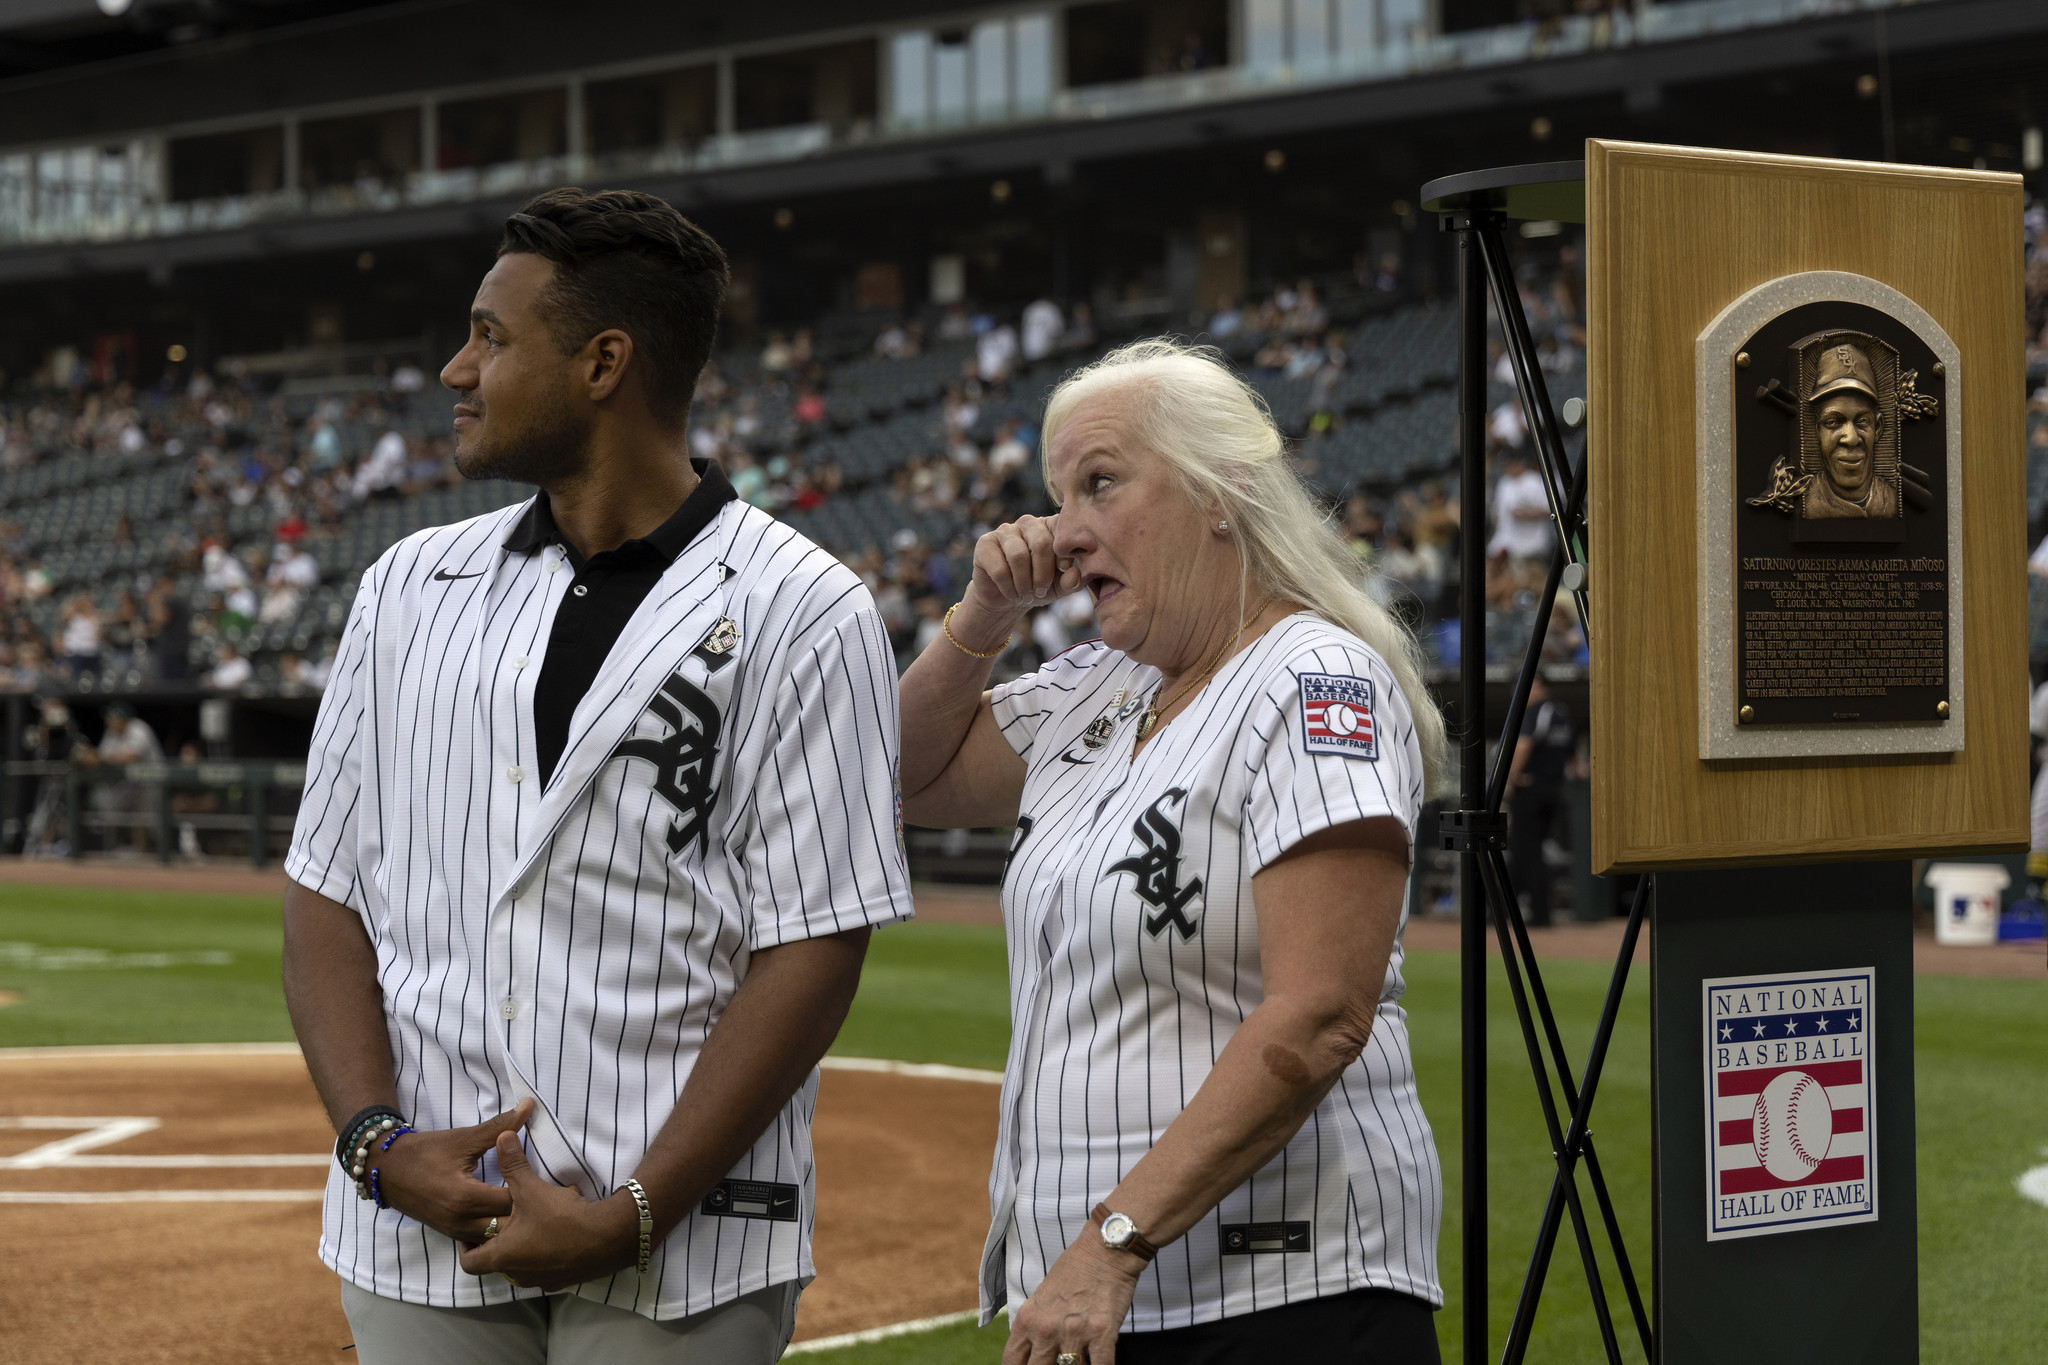 Soldier is honored in front of thousands at Chicago White Sox home